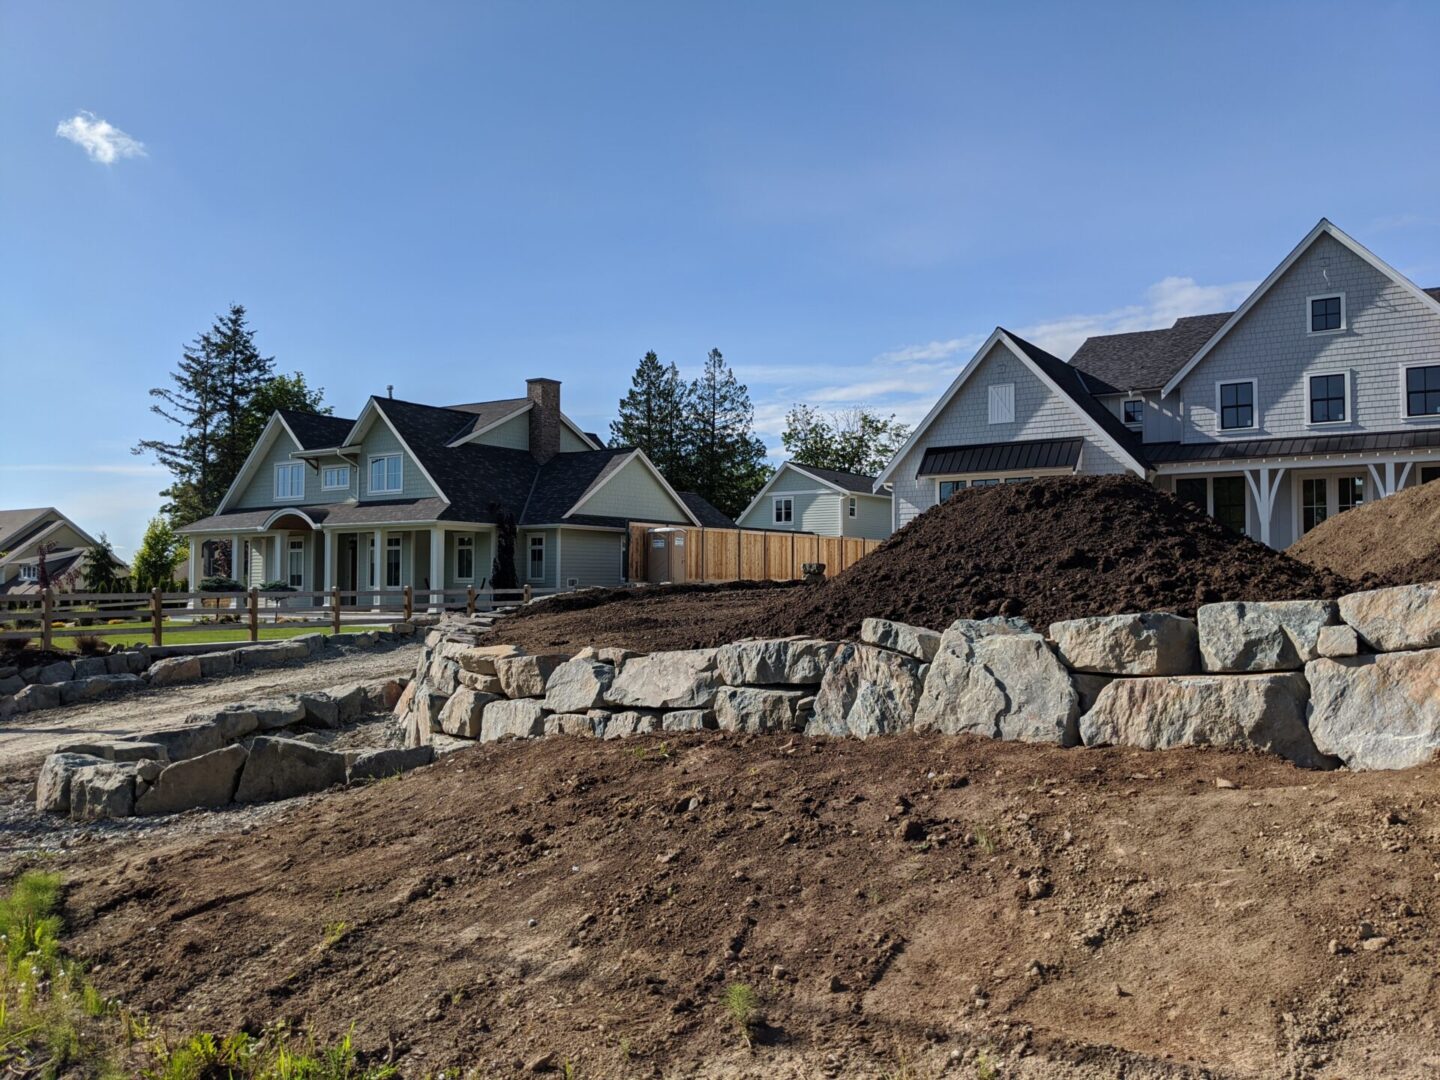 Suburban construction site with unfinished landscaping, featuring large piles of earth and boulders with houses in the background under a clear sky.